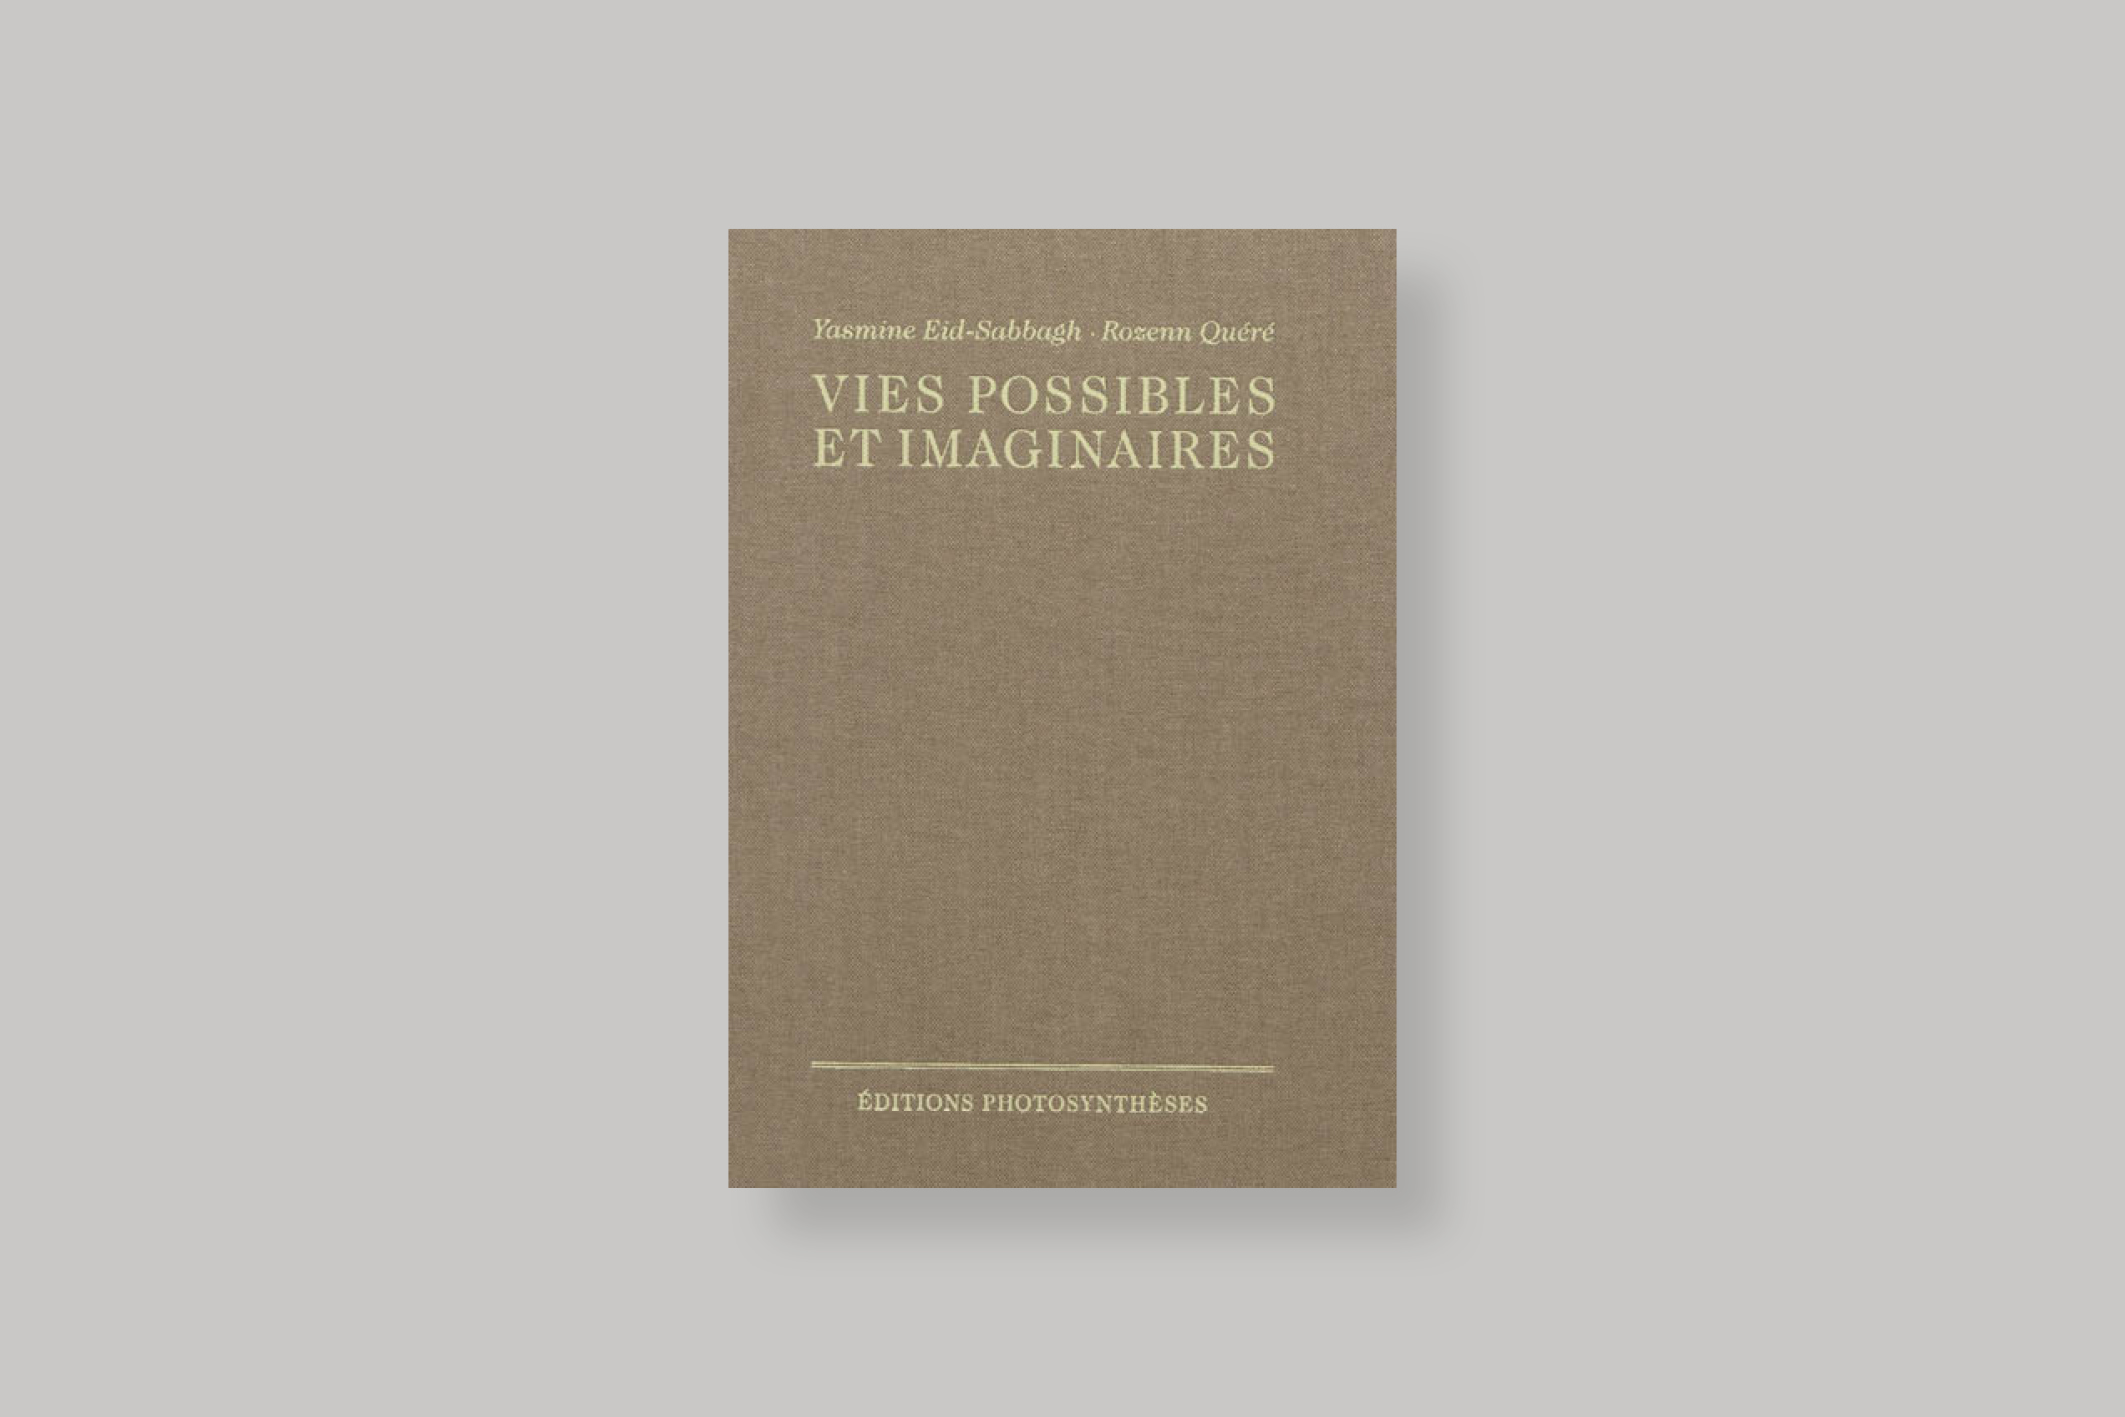 vies-possibles-et-imaginaires-yasmire-eid-sabbagh-photosyntheses-cover